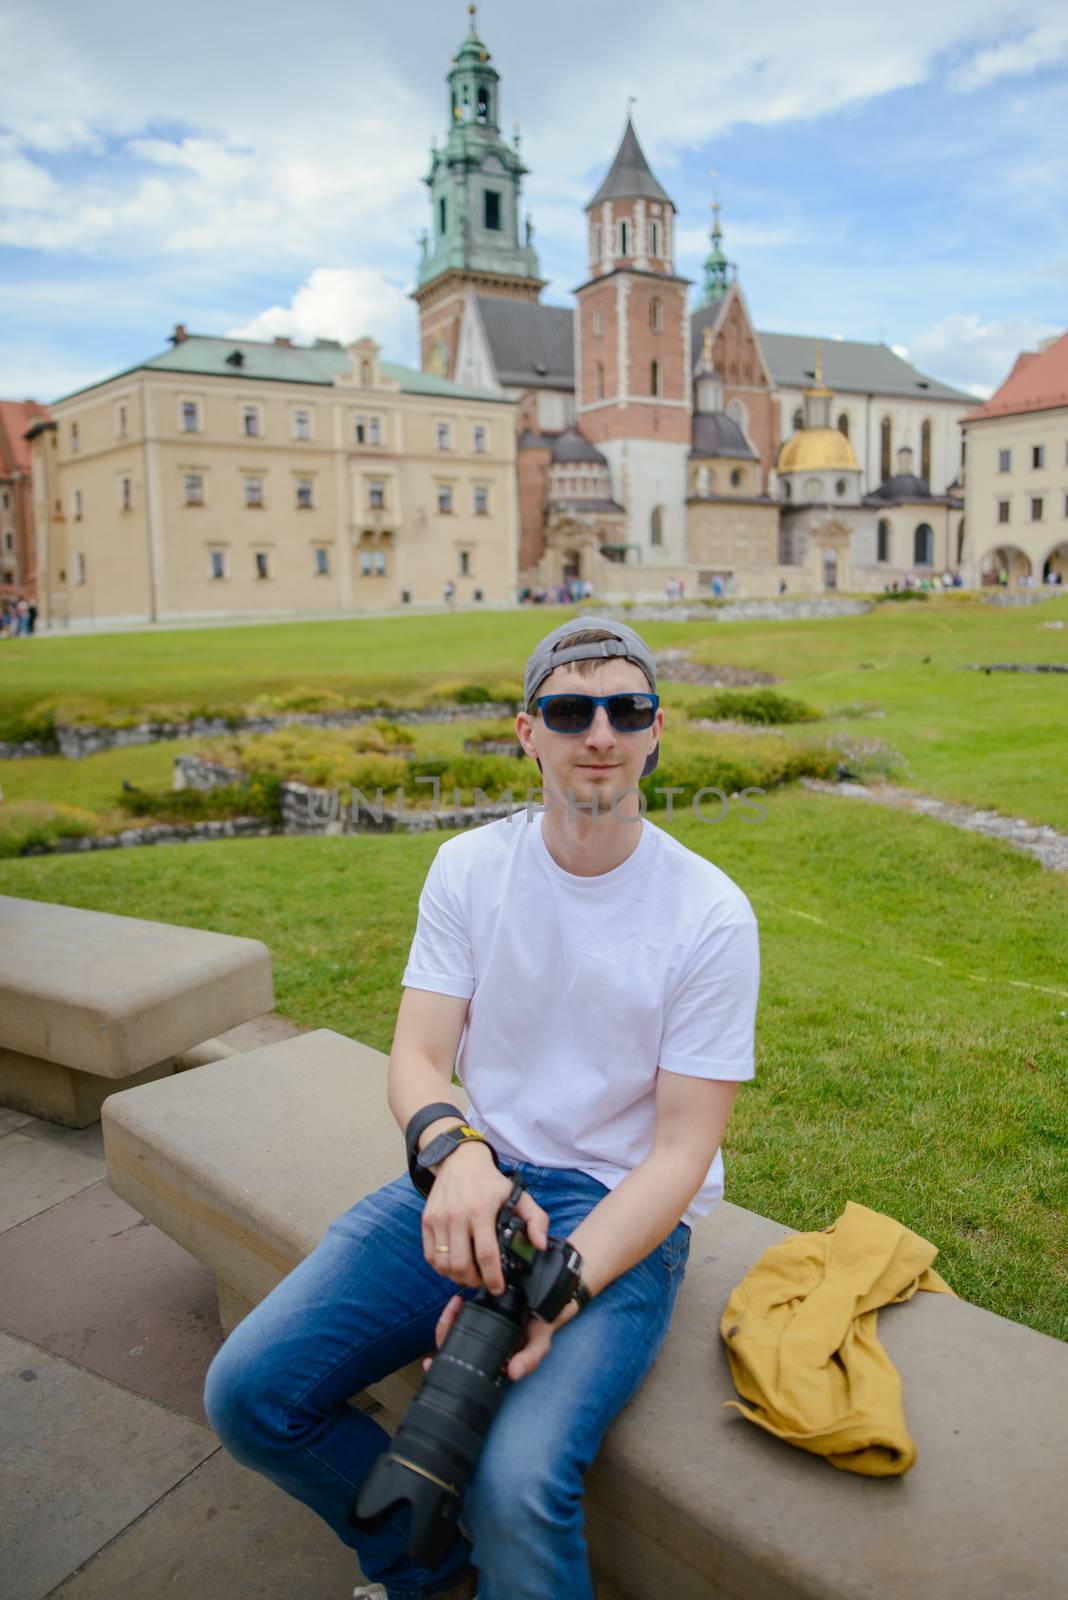 Man during sightseeing old castle in Cracow, Wawel. by Brejeq